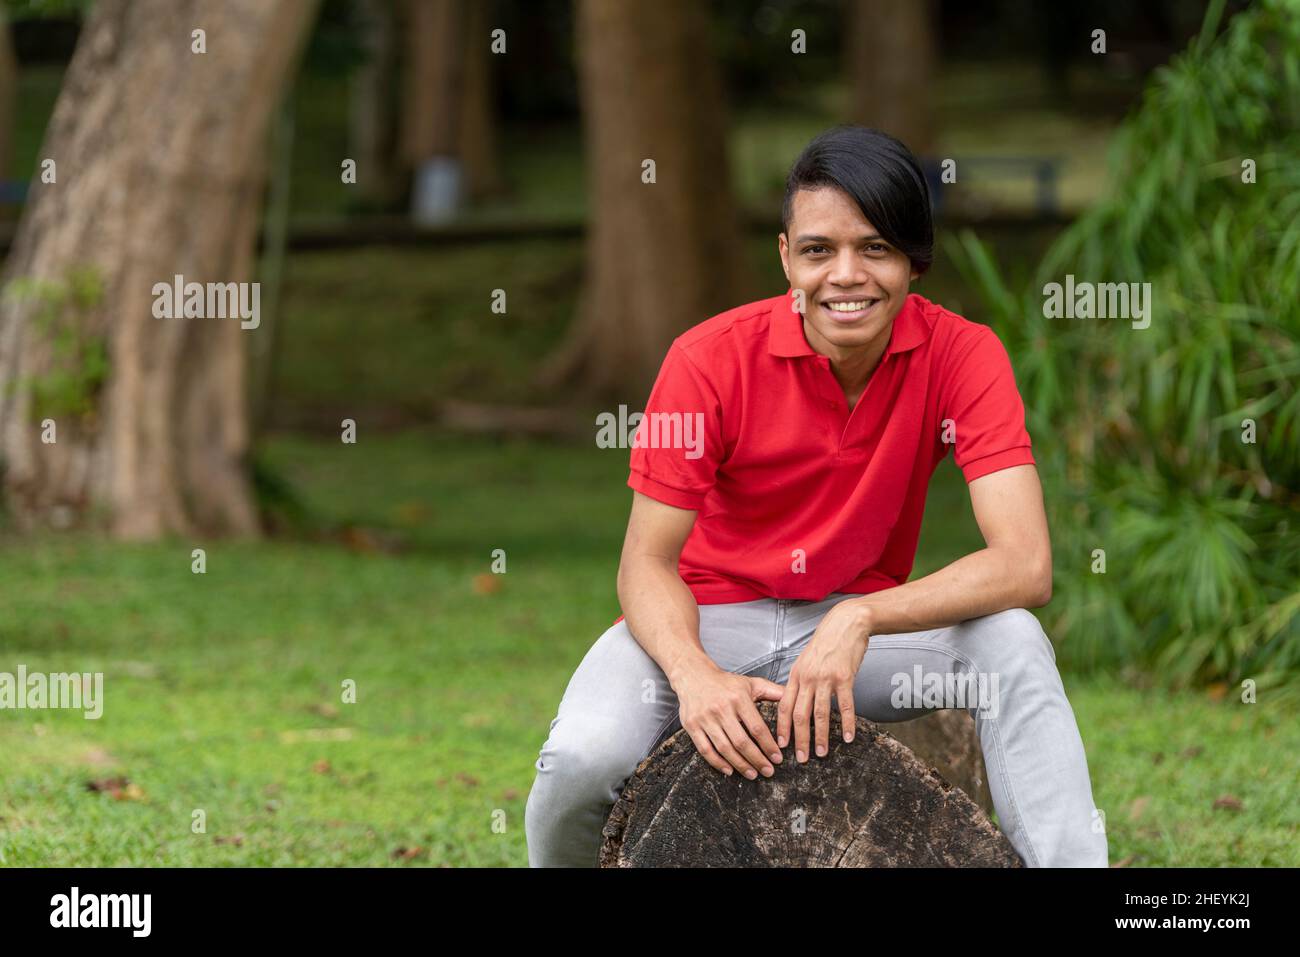 Portrait of young latin man in a public park, Panama Stock Photo